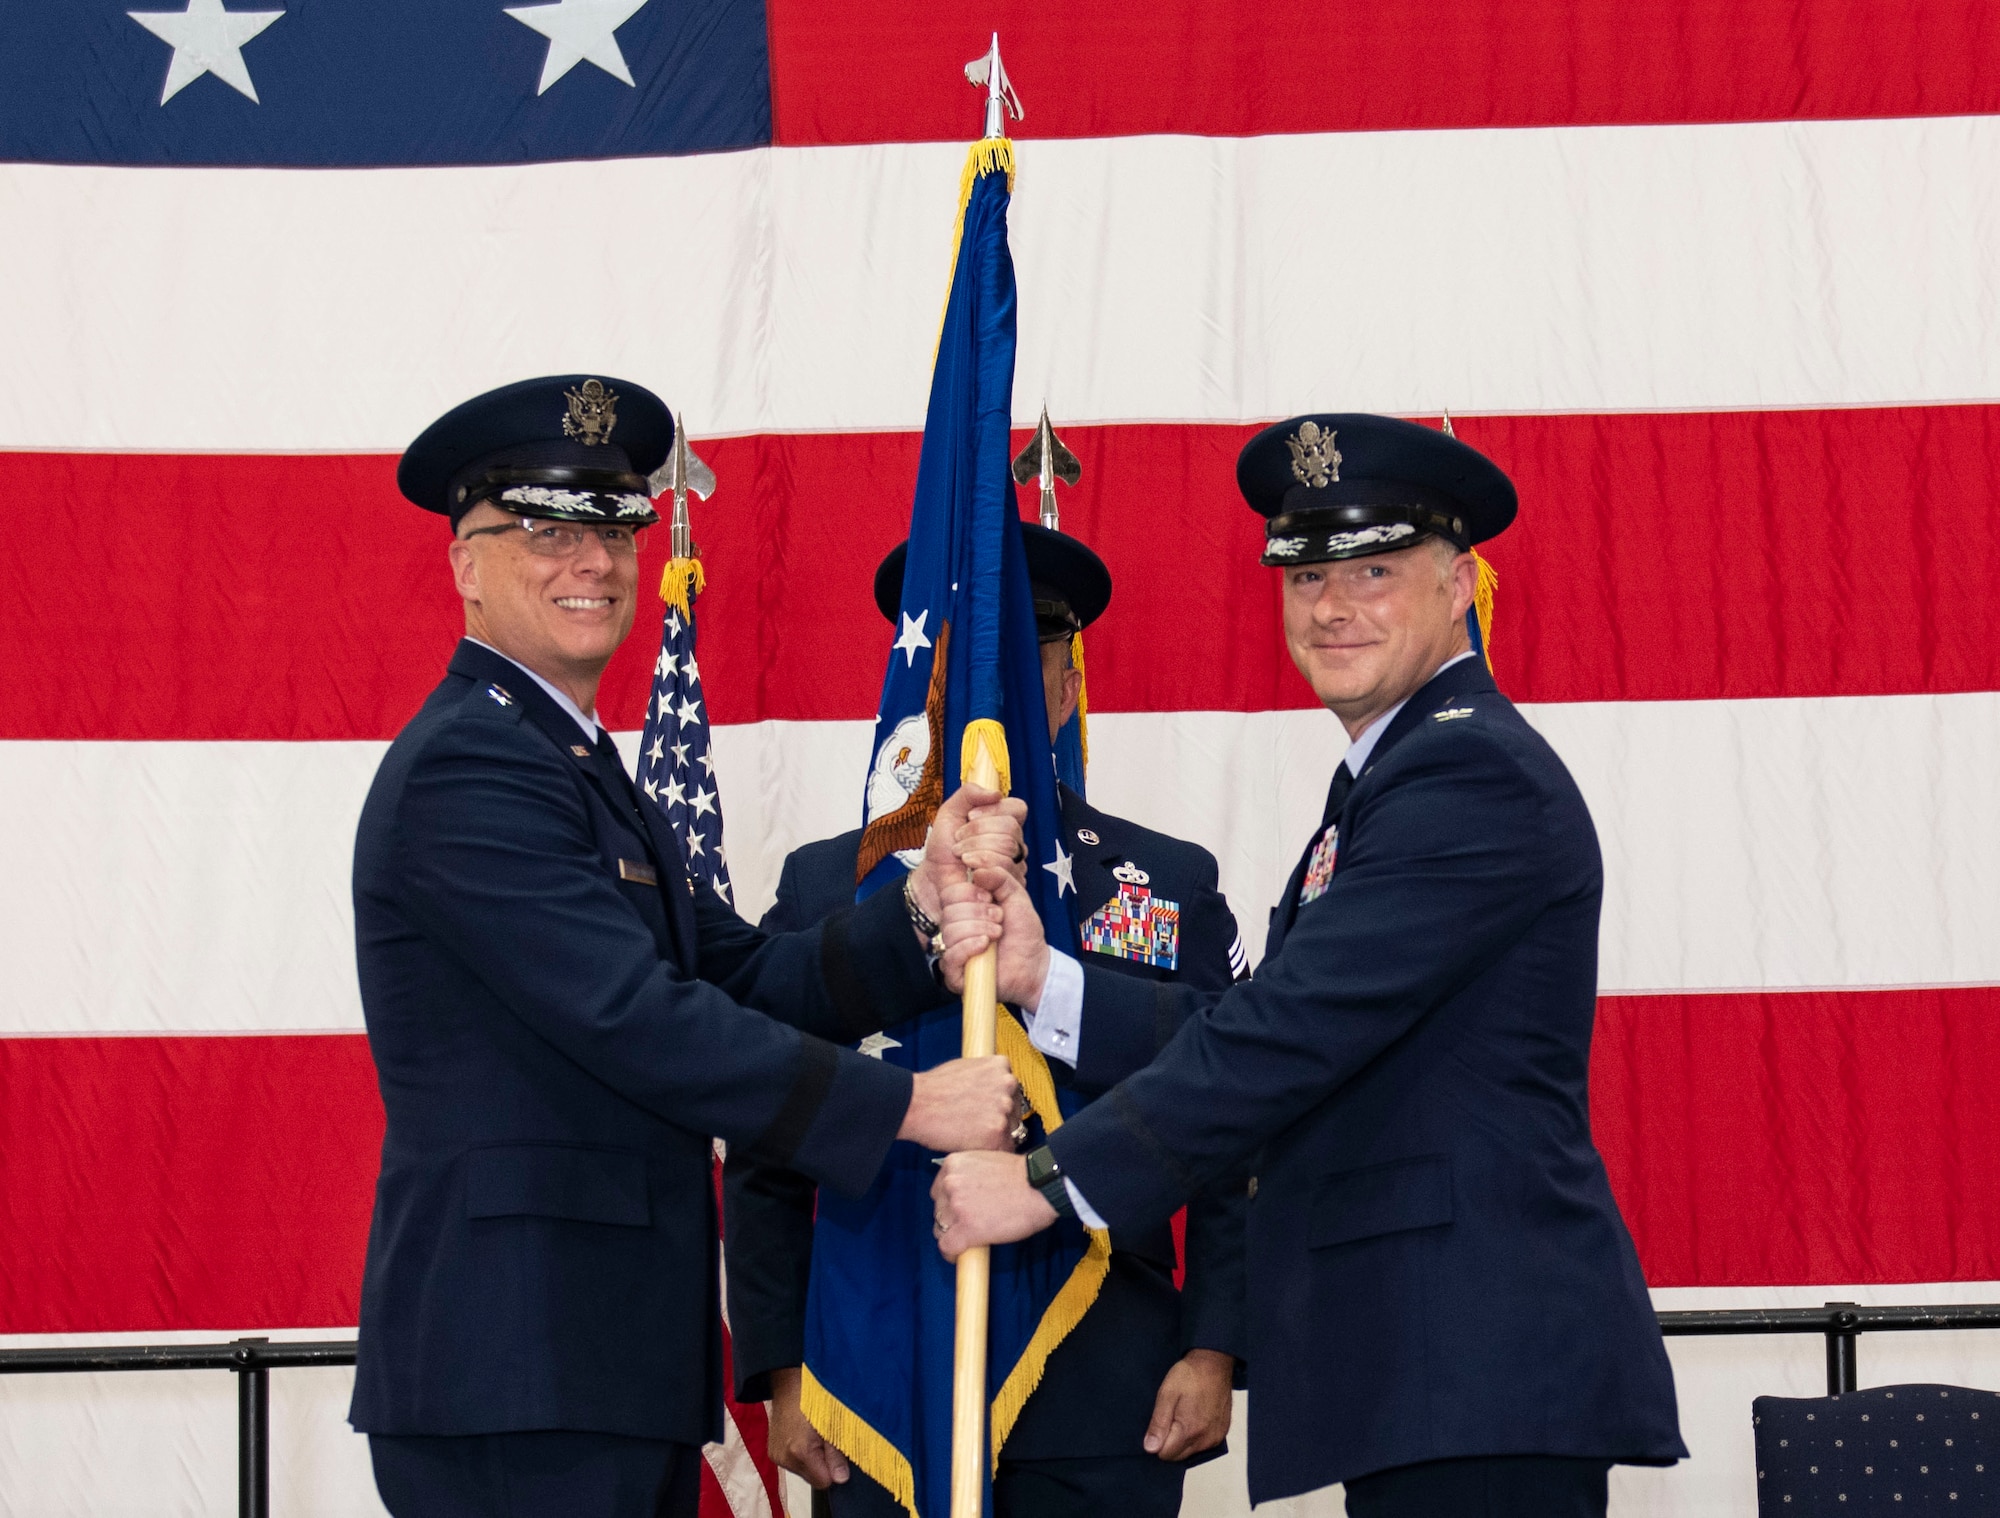 U.S. Air Force Maj. Gen. Mark Weatherington, Eighth Air Force and Commander Joint-Global Strike Operations Center, passes the unit flag to Col. Daniel Diehl, in-coming 509th Bomb Wing commander, during the 509th BW change of command ceremony, Whiteman Air Force Base, Missouri, June 16, 2021. Diehl transitioned to Whiteman AFB from Dyess AFB, Texas, where he commanded the 7th Operations Group -- Air Force Global Strike Command’s largest B-1 bomb group. At Whiteman, Diehl will be responsible for the combat readiness of the Air Force’s only B-2 Spirit wing and supporting installation functions. (U.S. Air Force photo by Airman First Class Victoria Hommel)